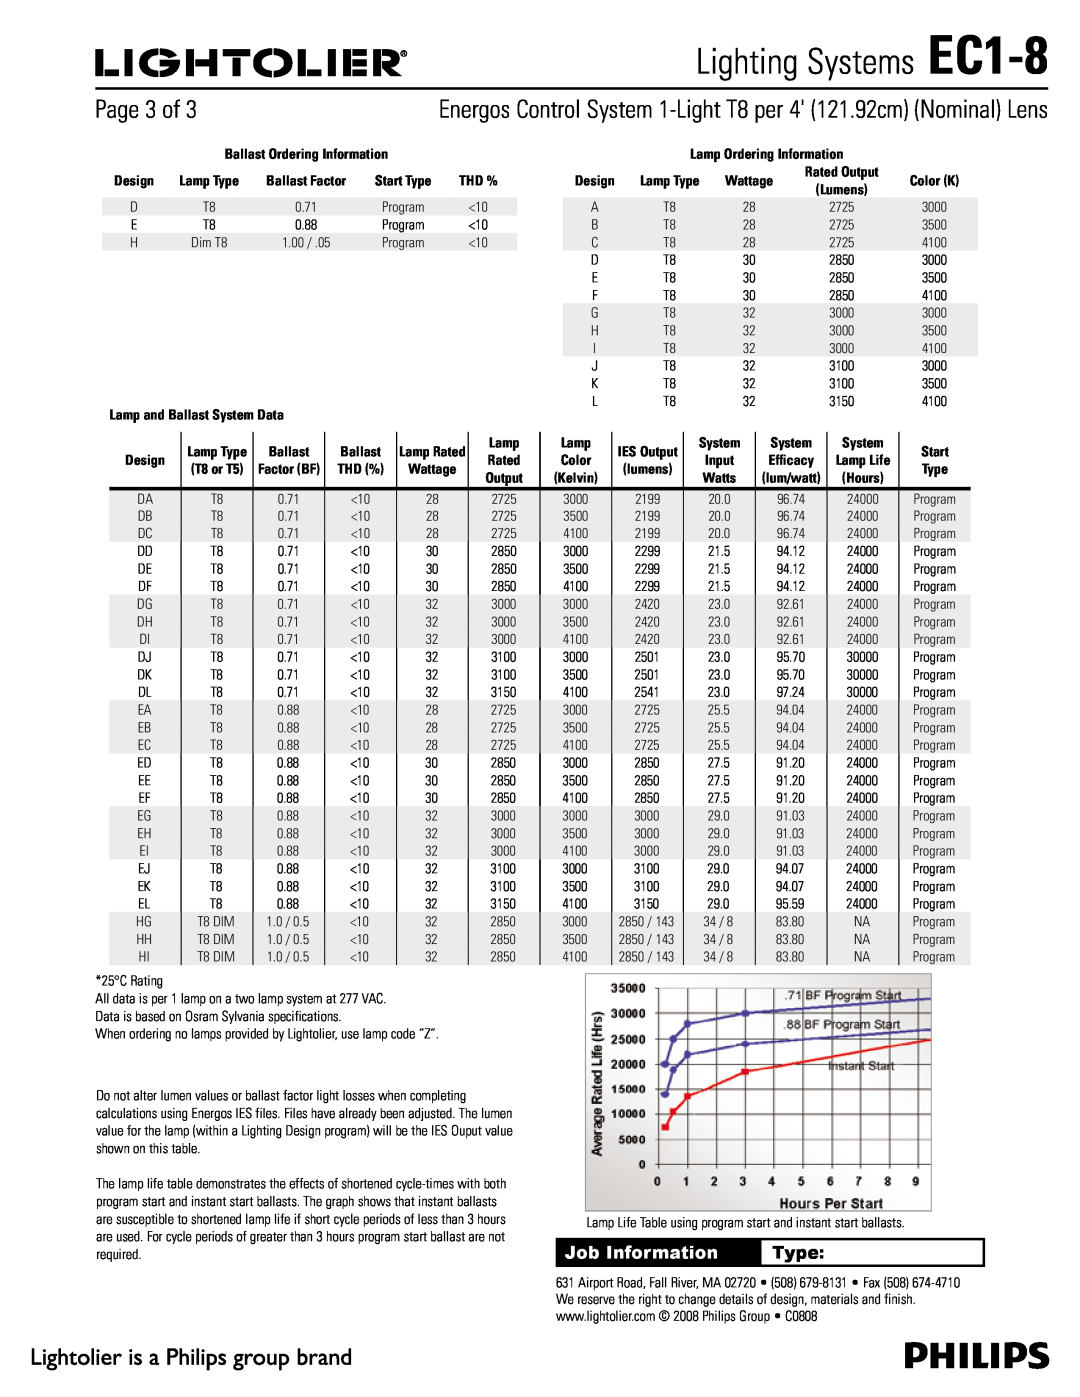 Lightolier specifications Page 3 of, Lighting Systems EC1-8, Job Information, Type, Lamp Ordering Information, Wattage 